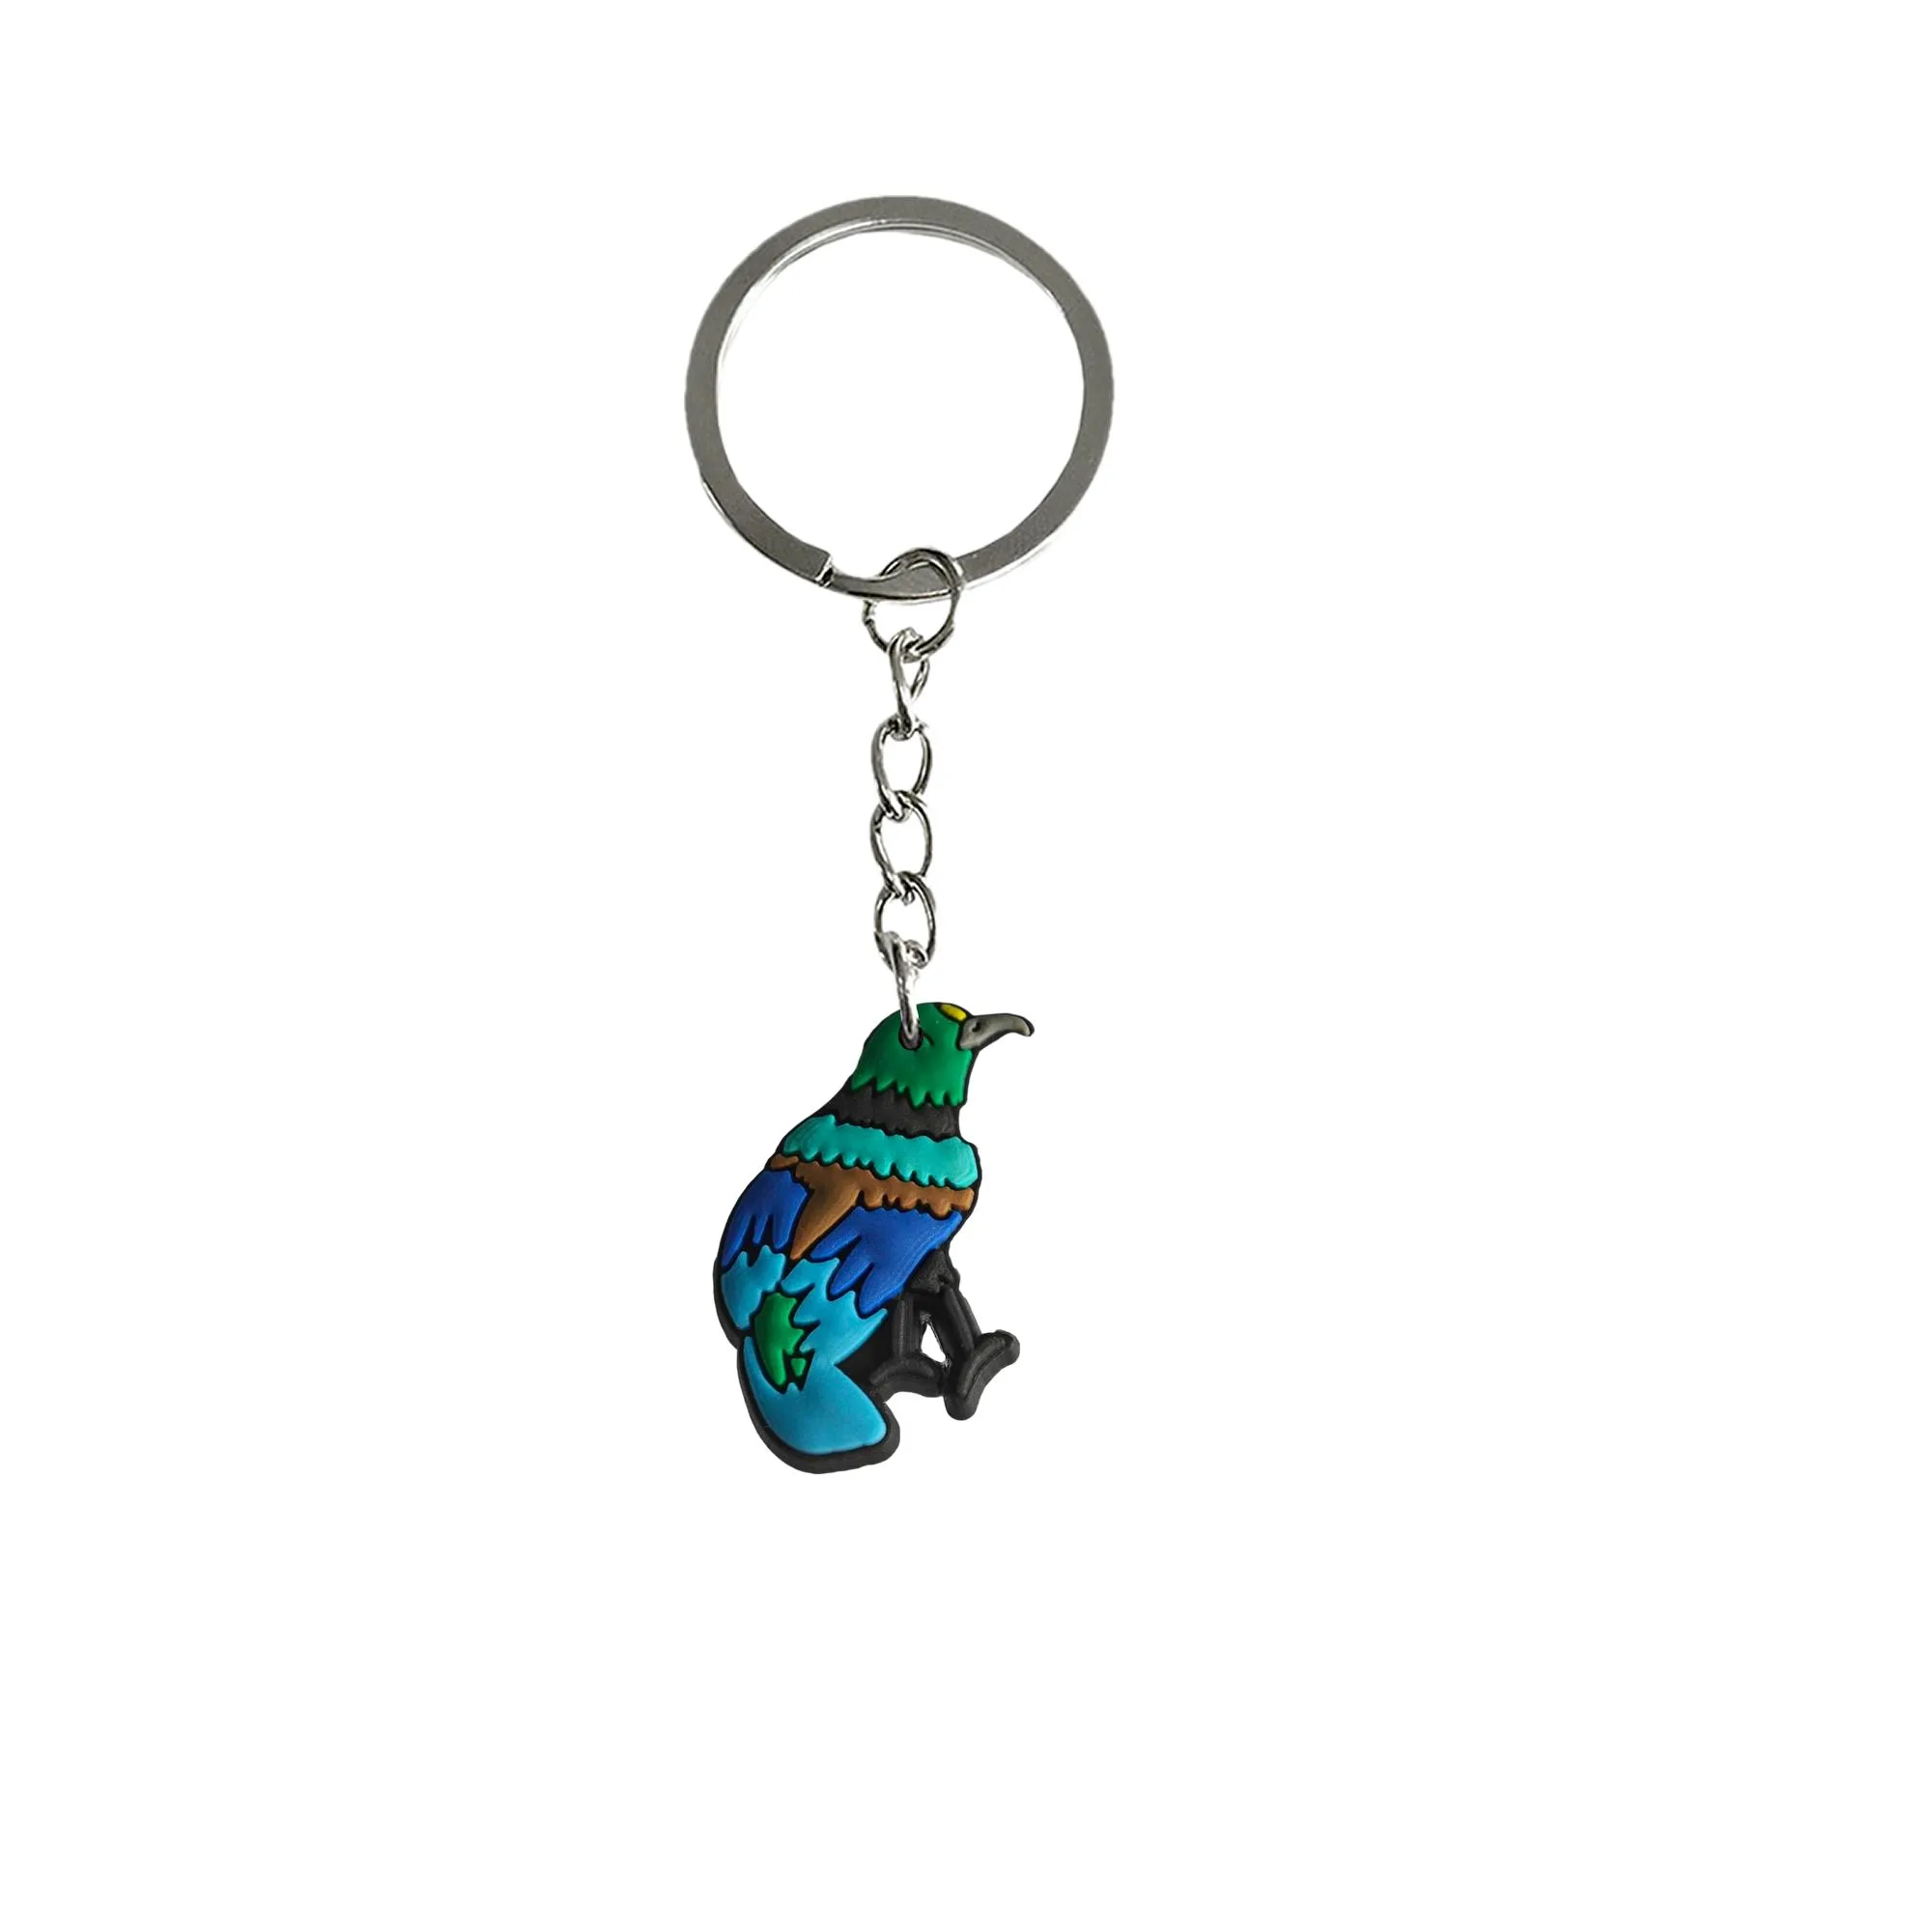 bird keychain keyrings for bags keychains boys party favors keyring suitable schoolbag key chain accessories backpack handbag and car gift valentines day girls tags goodie bag stuffer christmas gifts holiday charms